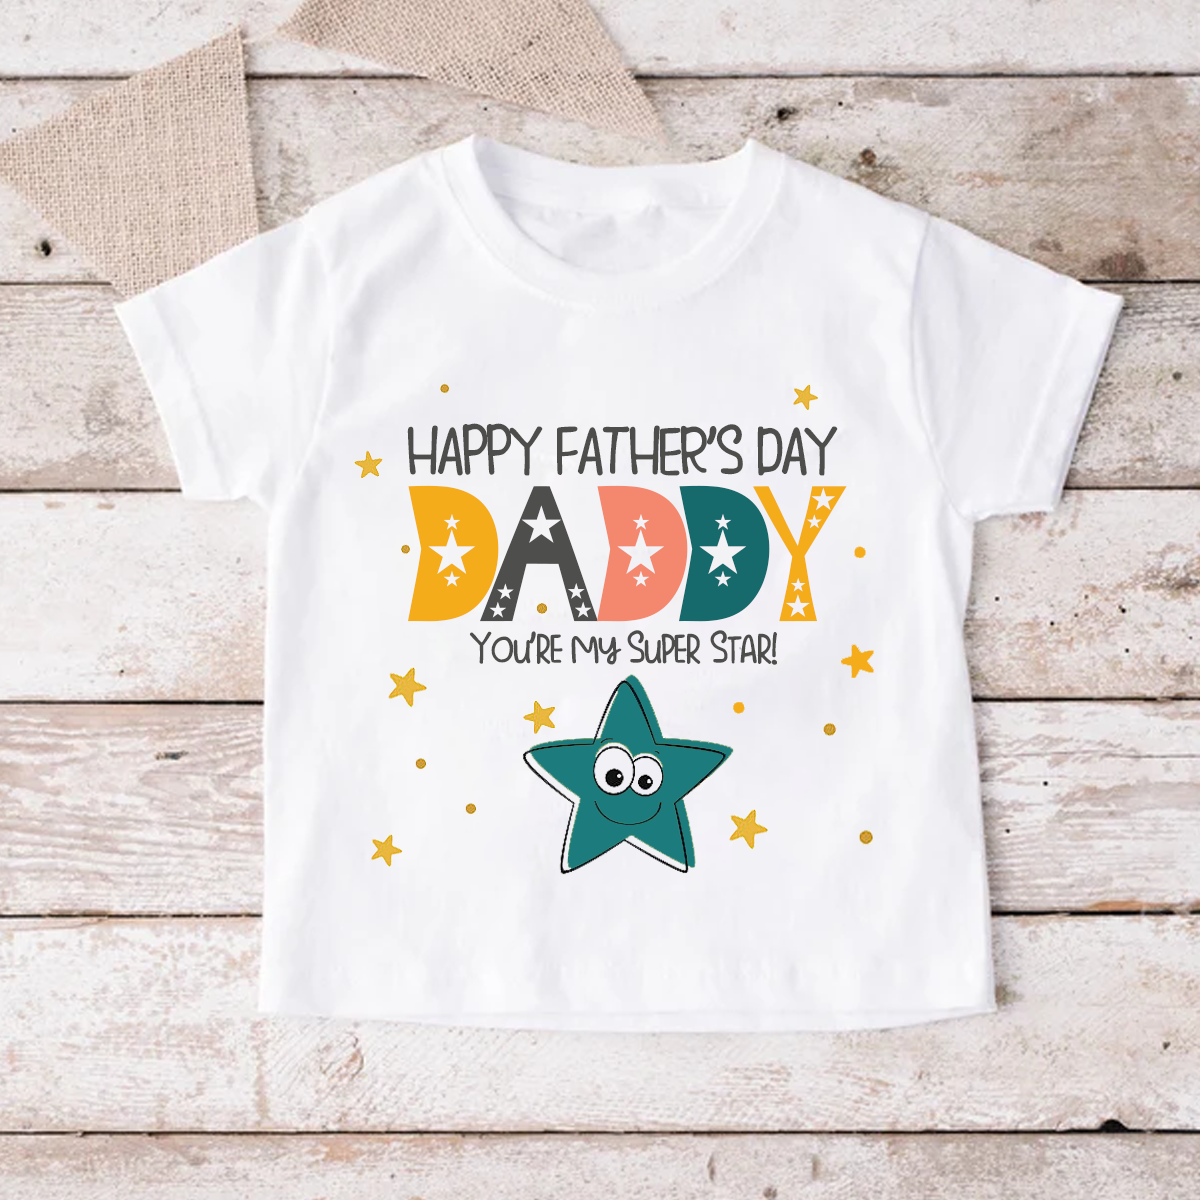 Happy Father's Day Daddy - You are my Super Star T-Shirt